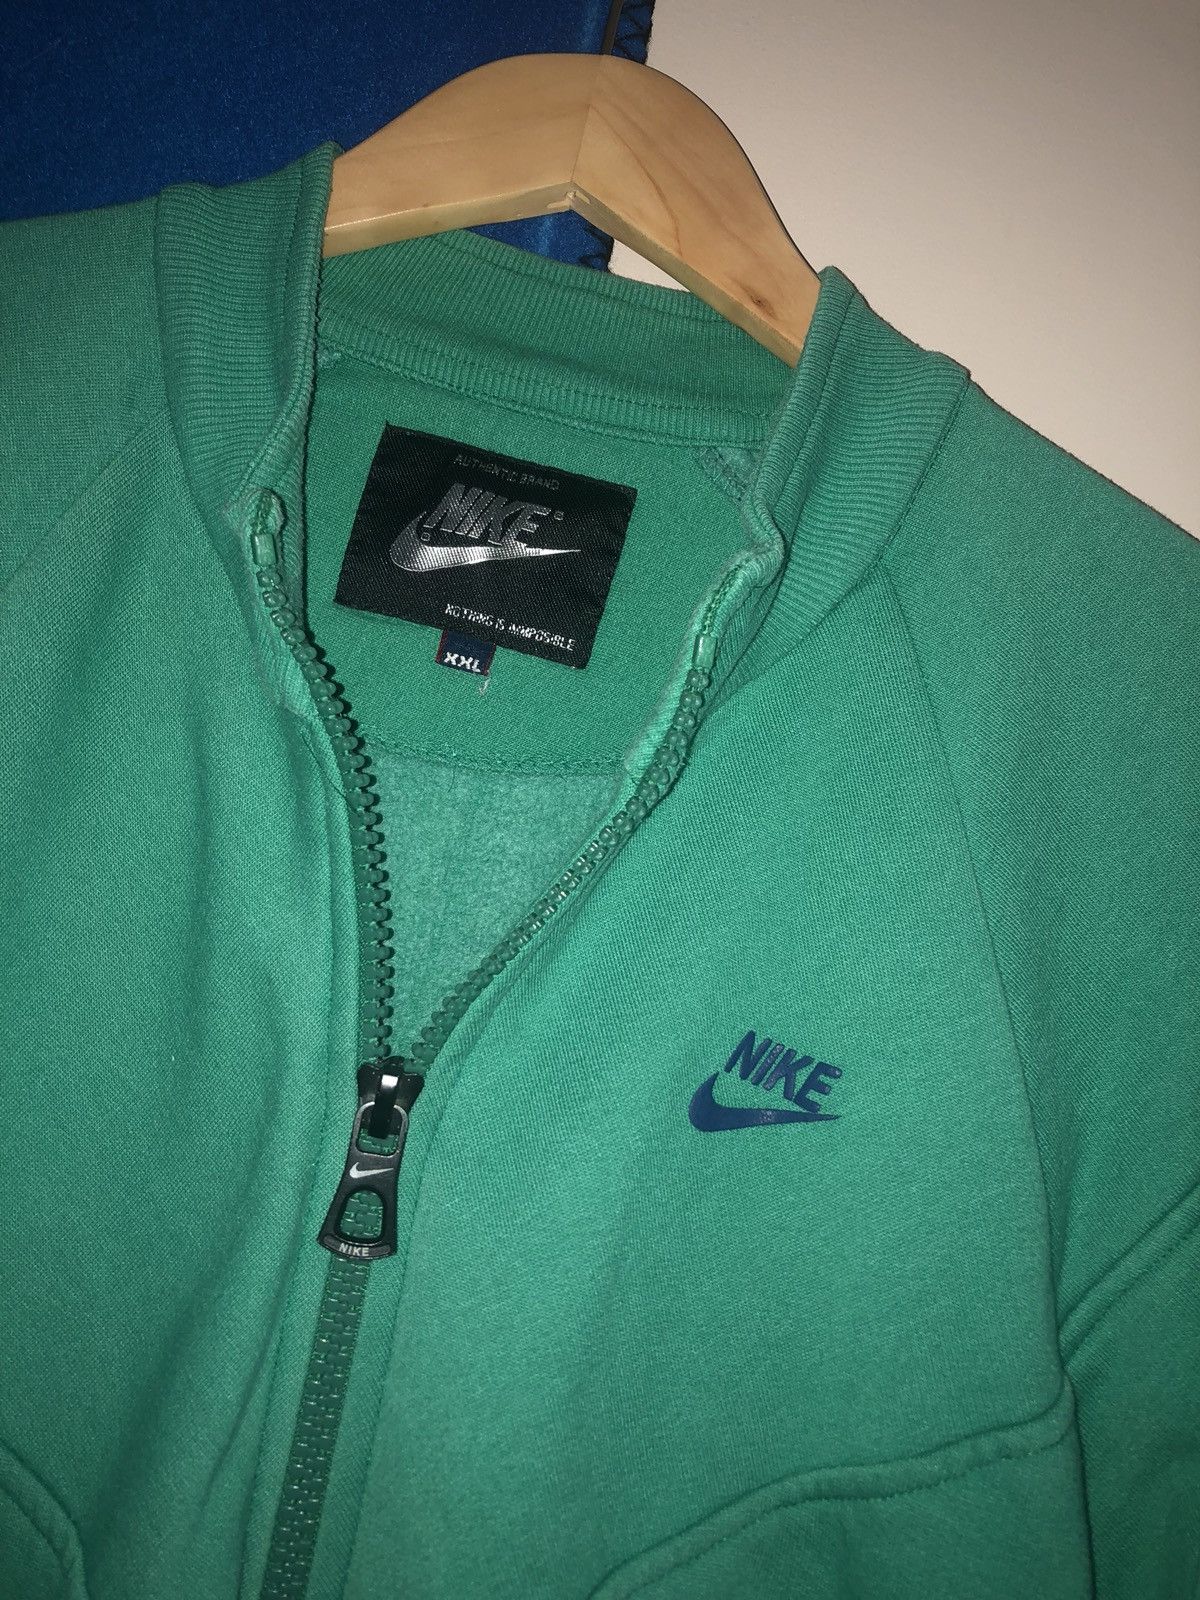 Nike Vintage Teal Nike Zip Up Sweater Size Large Size US L / EU 52-54 / 3 - 3 Preview